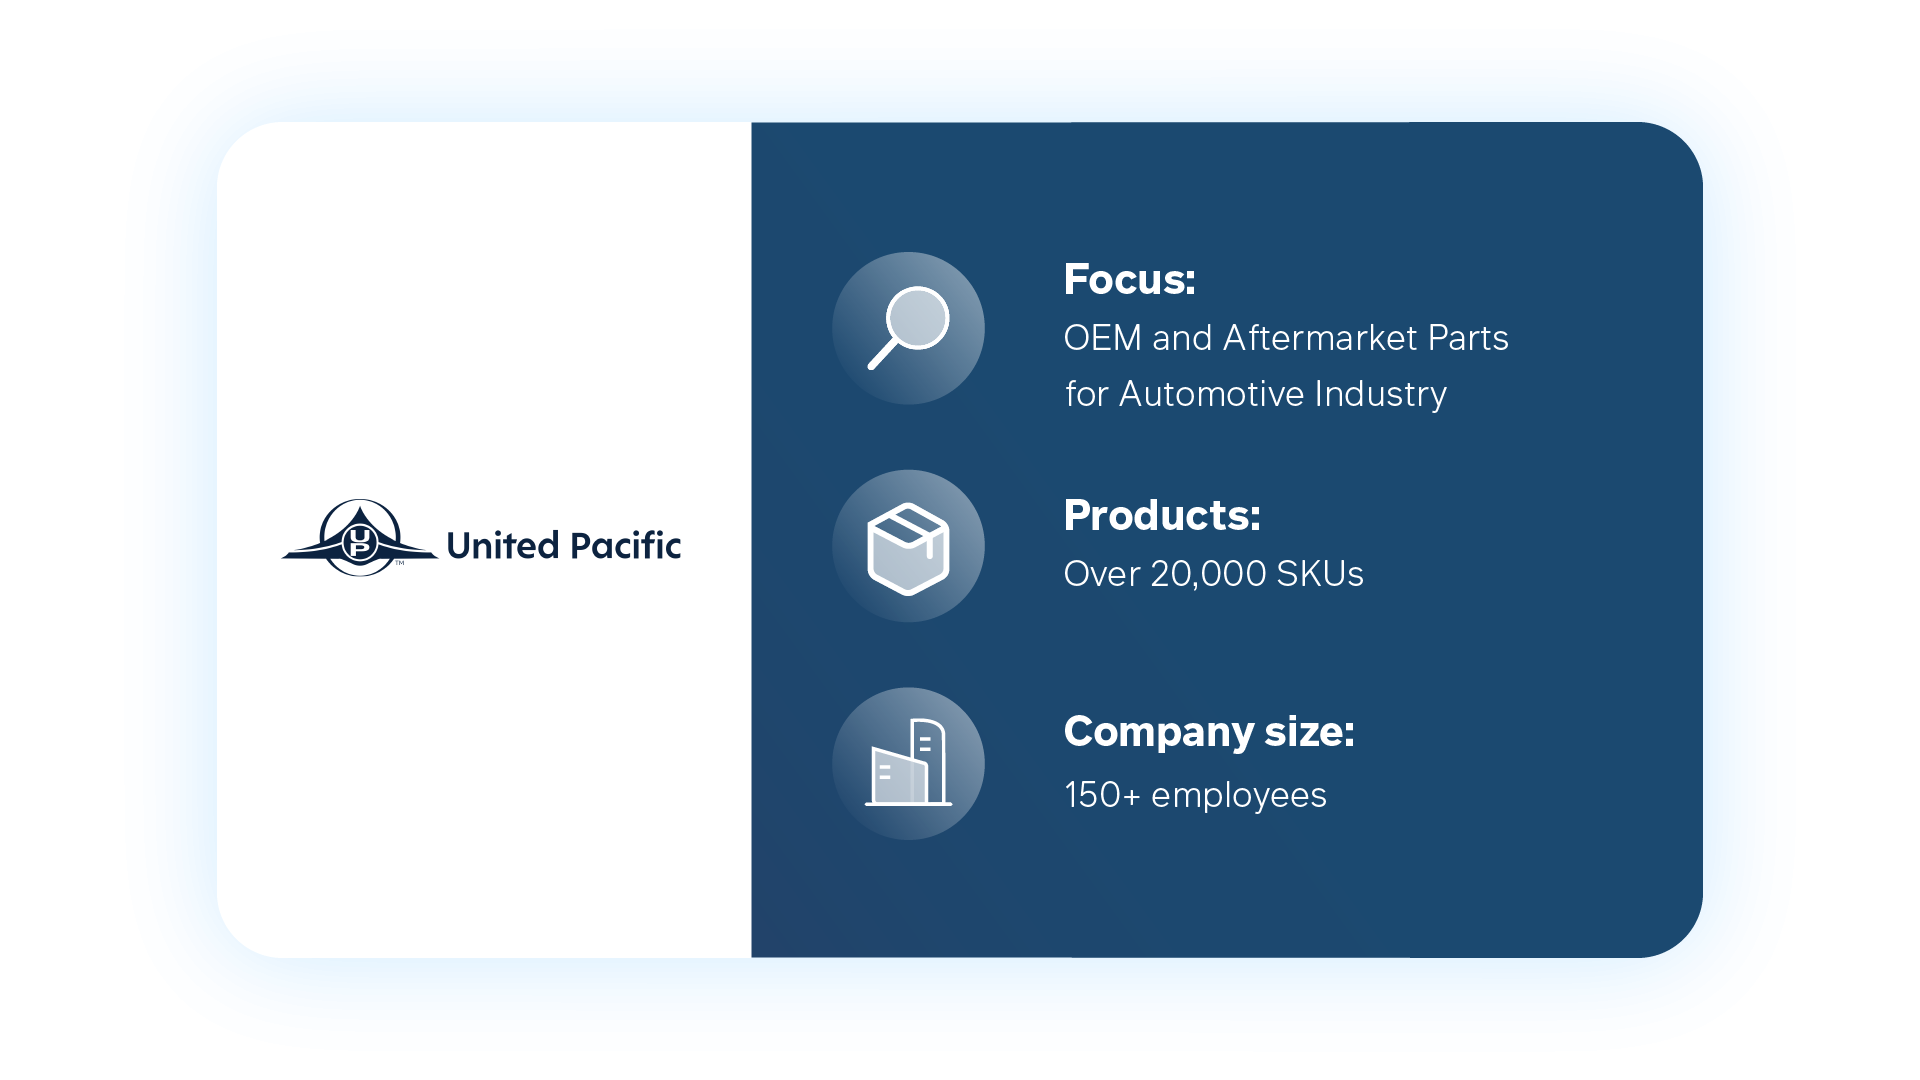 United Pacific Focus: OEM and Aftermarket Parts for Automotive Industry Products: Over 20,000 SKUs Company Size: 150+ employees